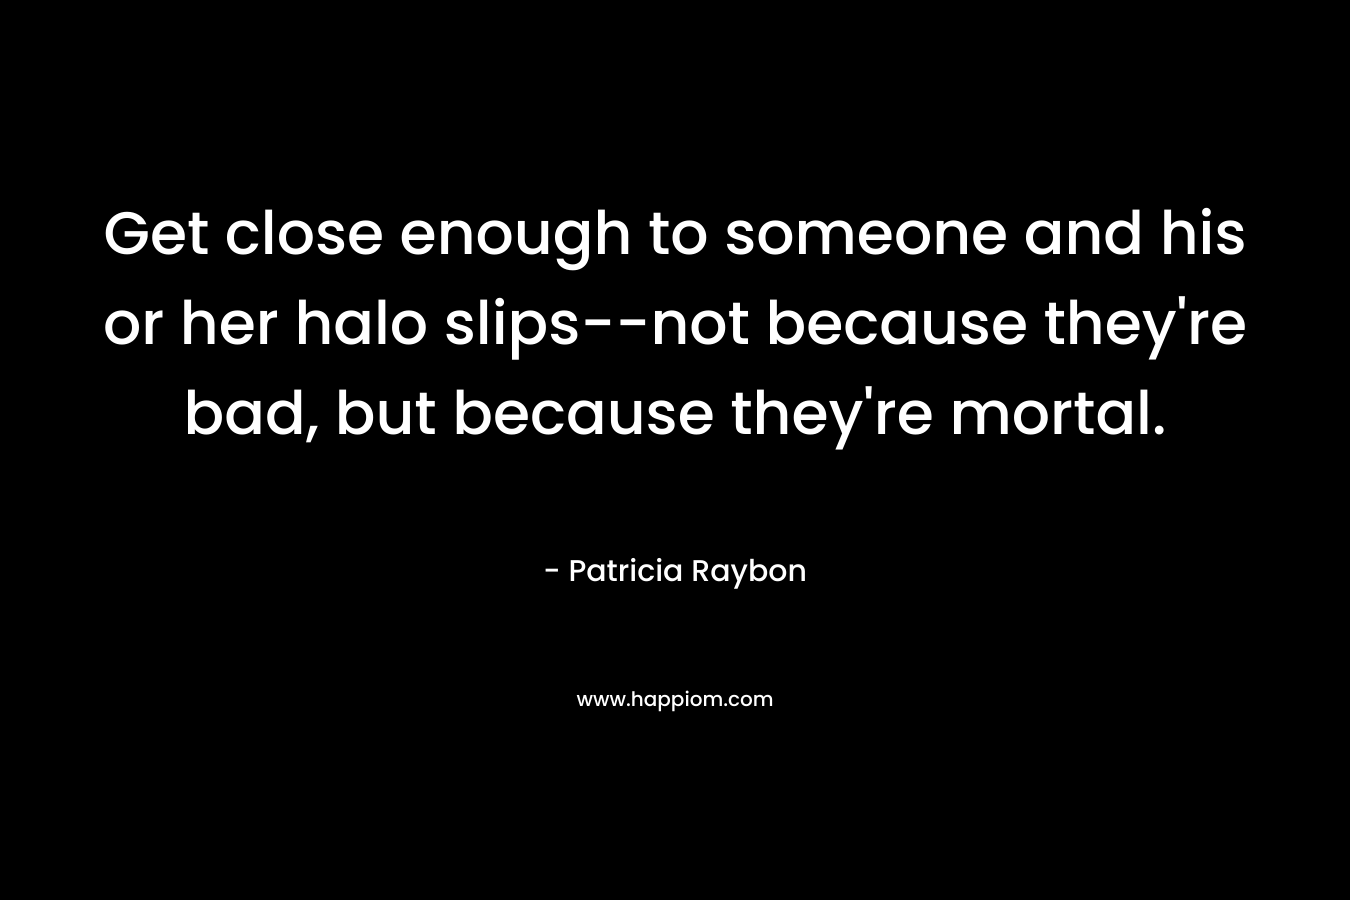 Get close enough to someone and his or her halo slips–not because they’re bad, but because they’re mortal. – Patricia Raybon